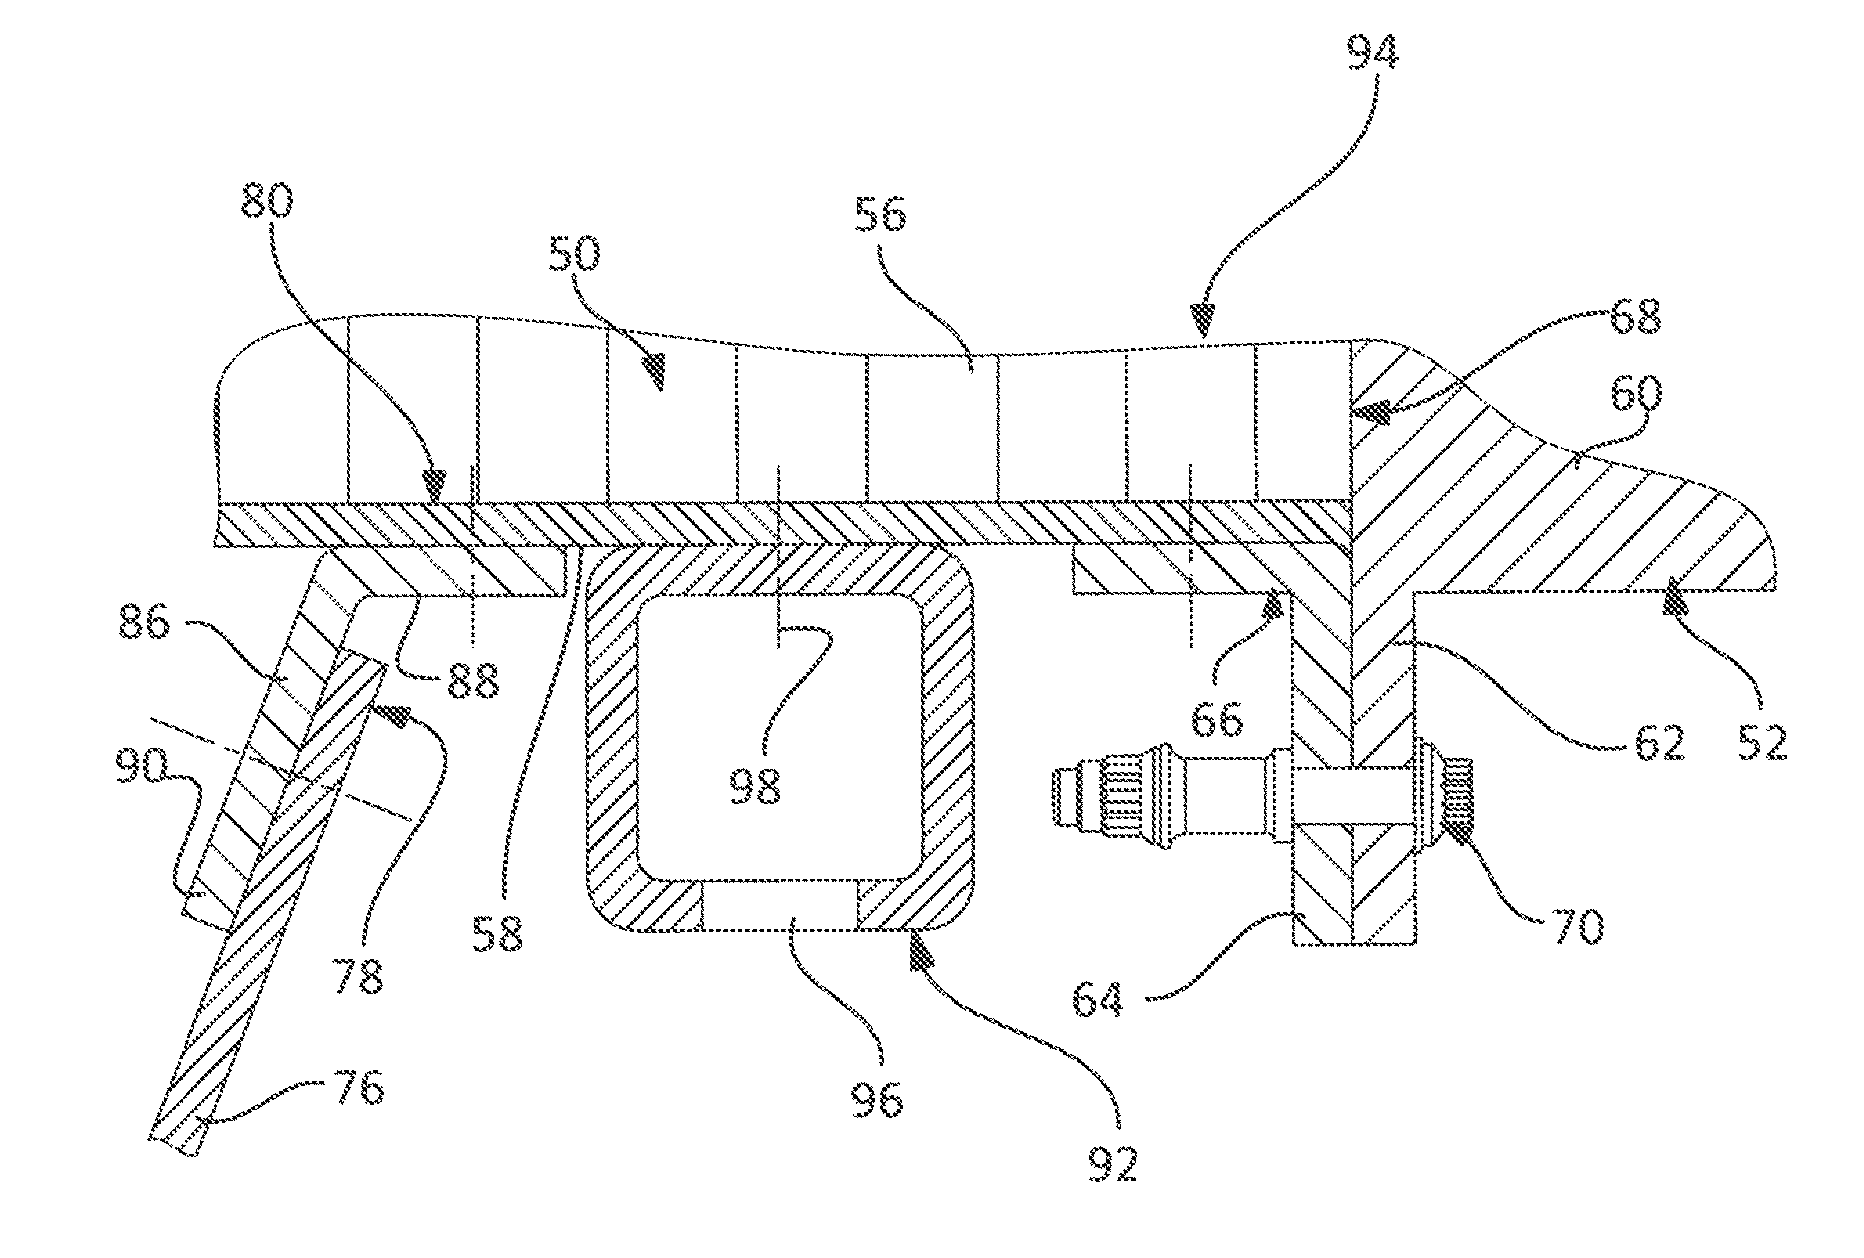 Aircraft nacelle comprising a reinforced connection between an air intake and a powerplant